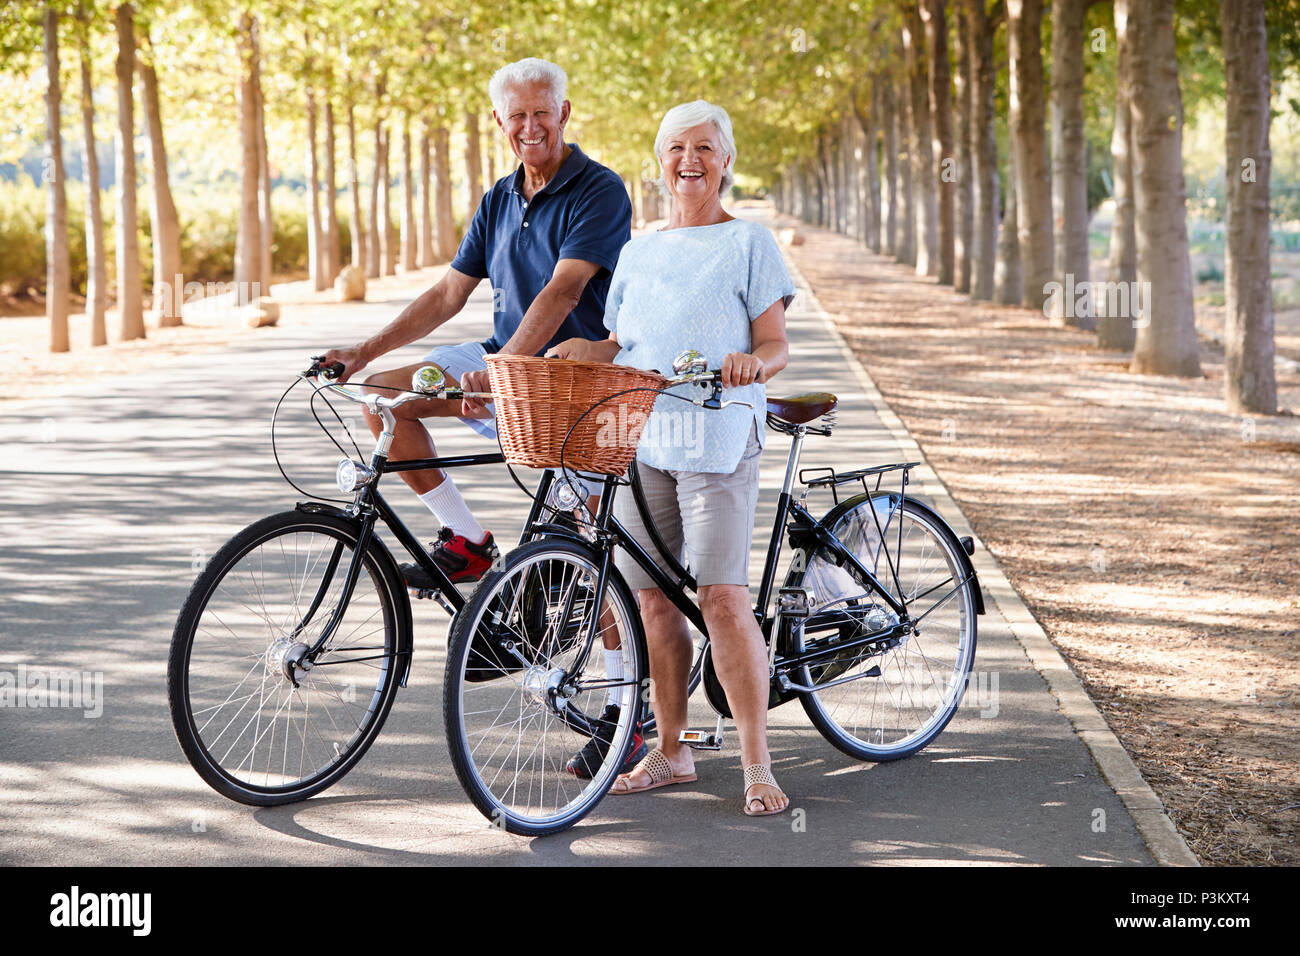 Portrait Of Smiling Senior Couple Cycling On Country Road Banque D'Images